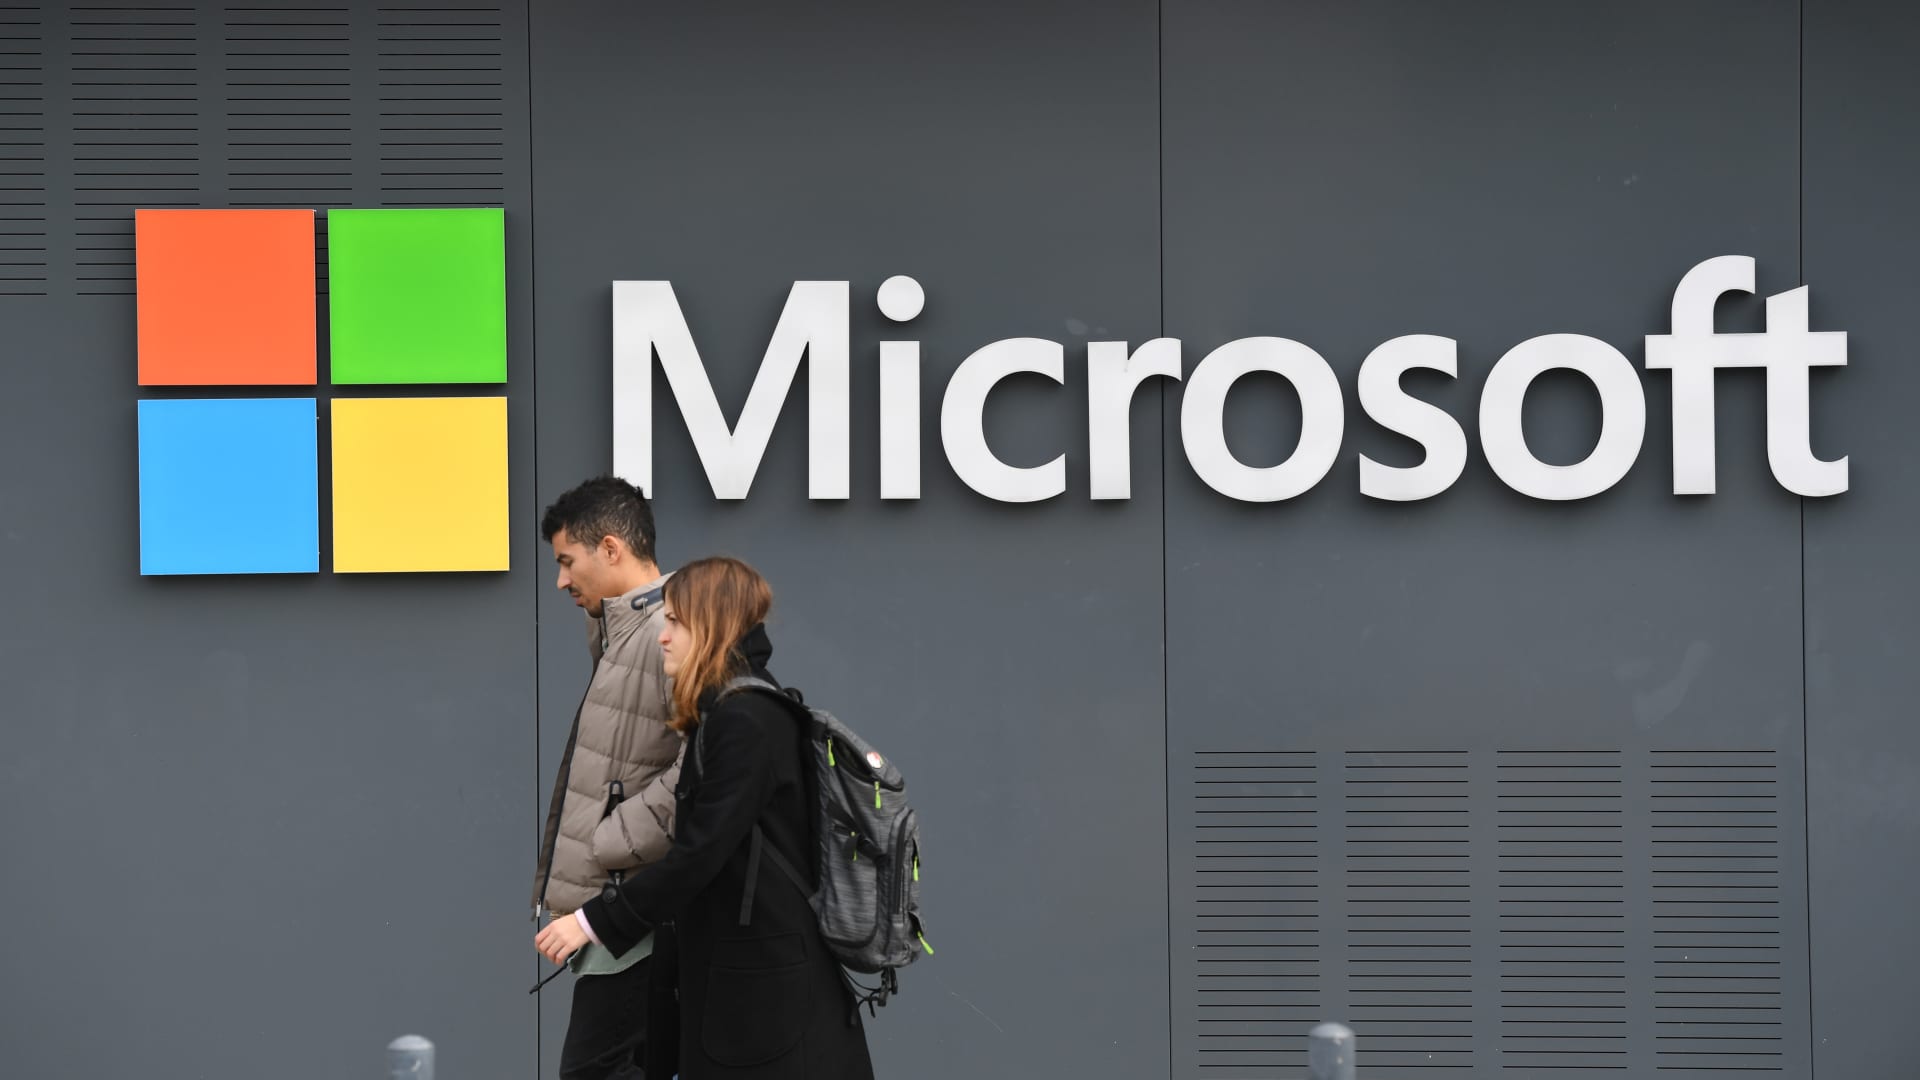 Microsoft     warned on Wednesday that Chinese state-sponsored hackers had compromised "critical" U.S. cyber infrastructure across numerous 